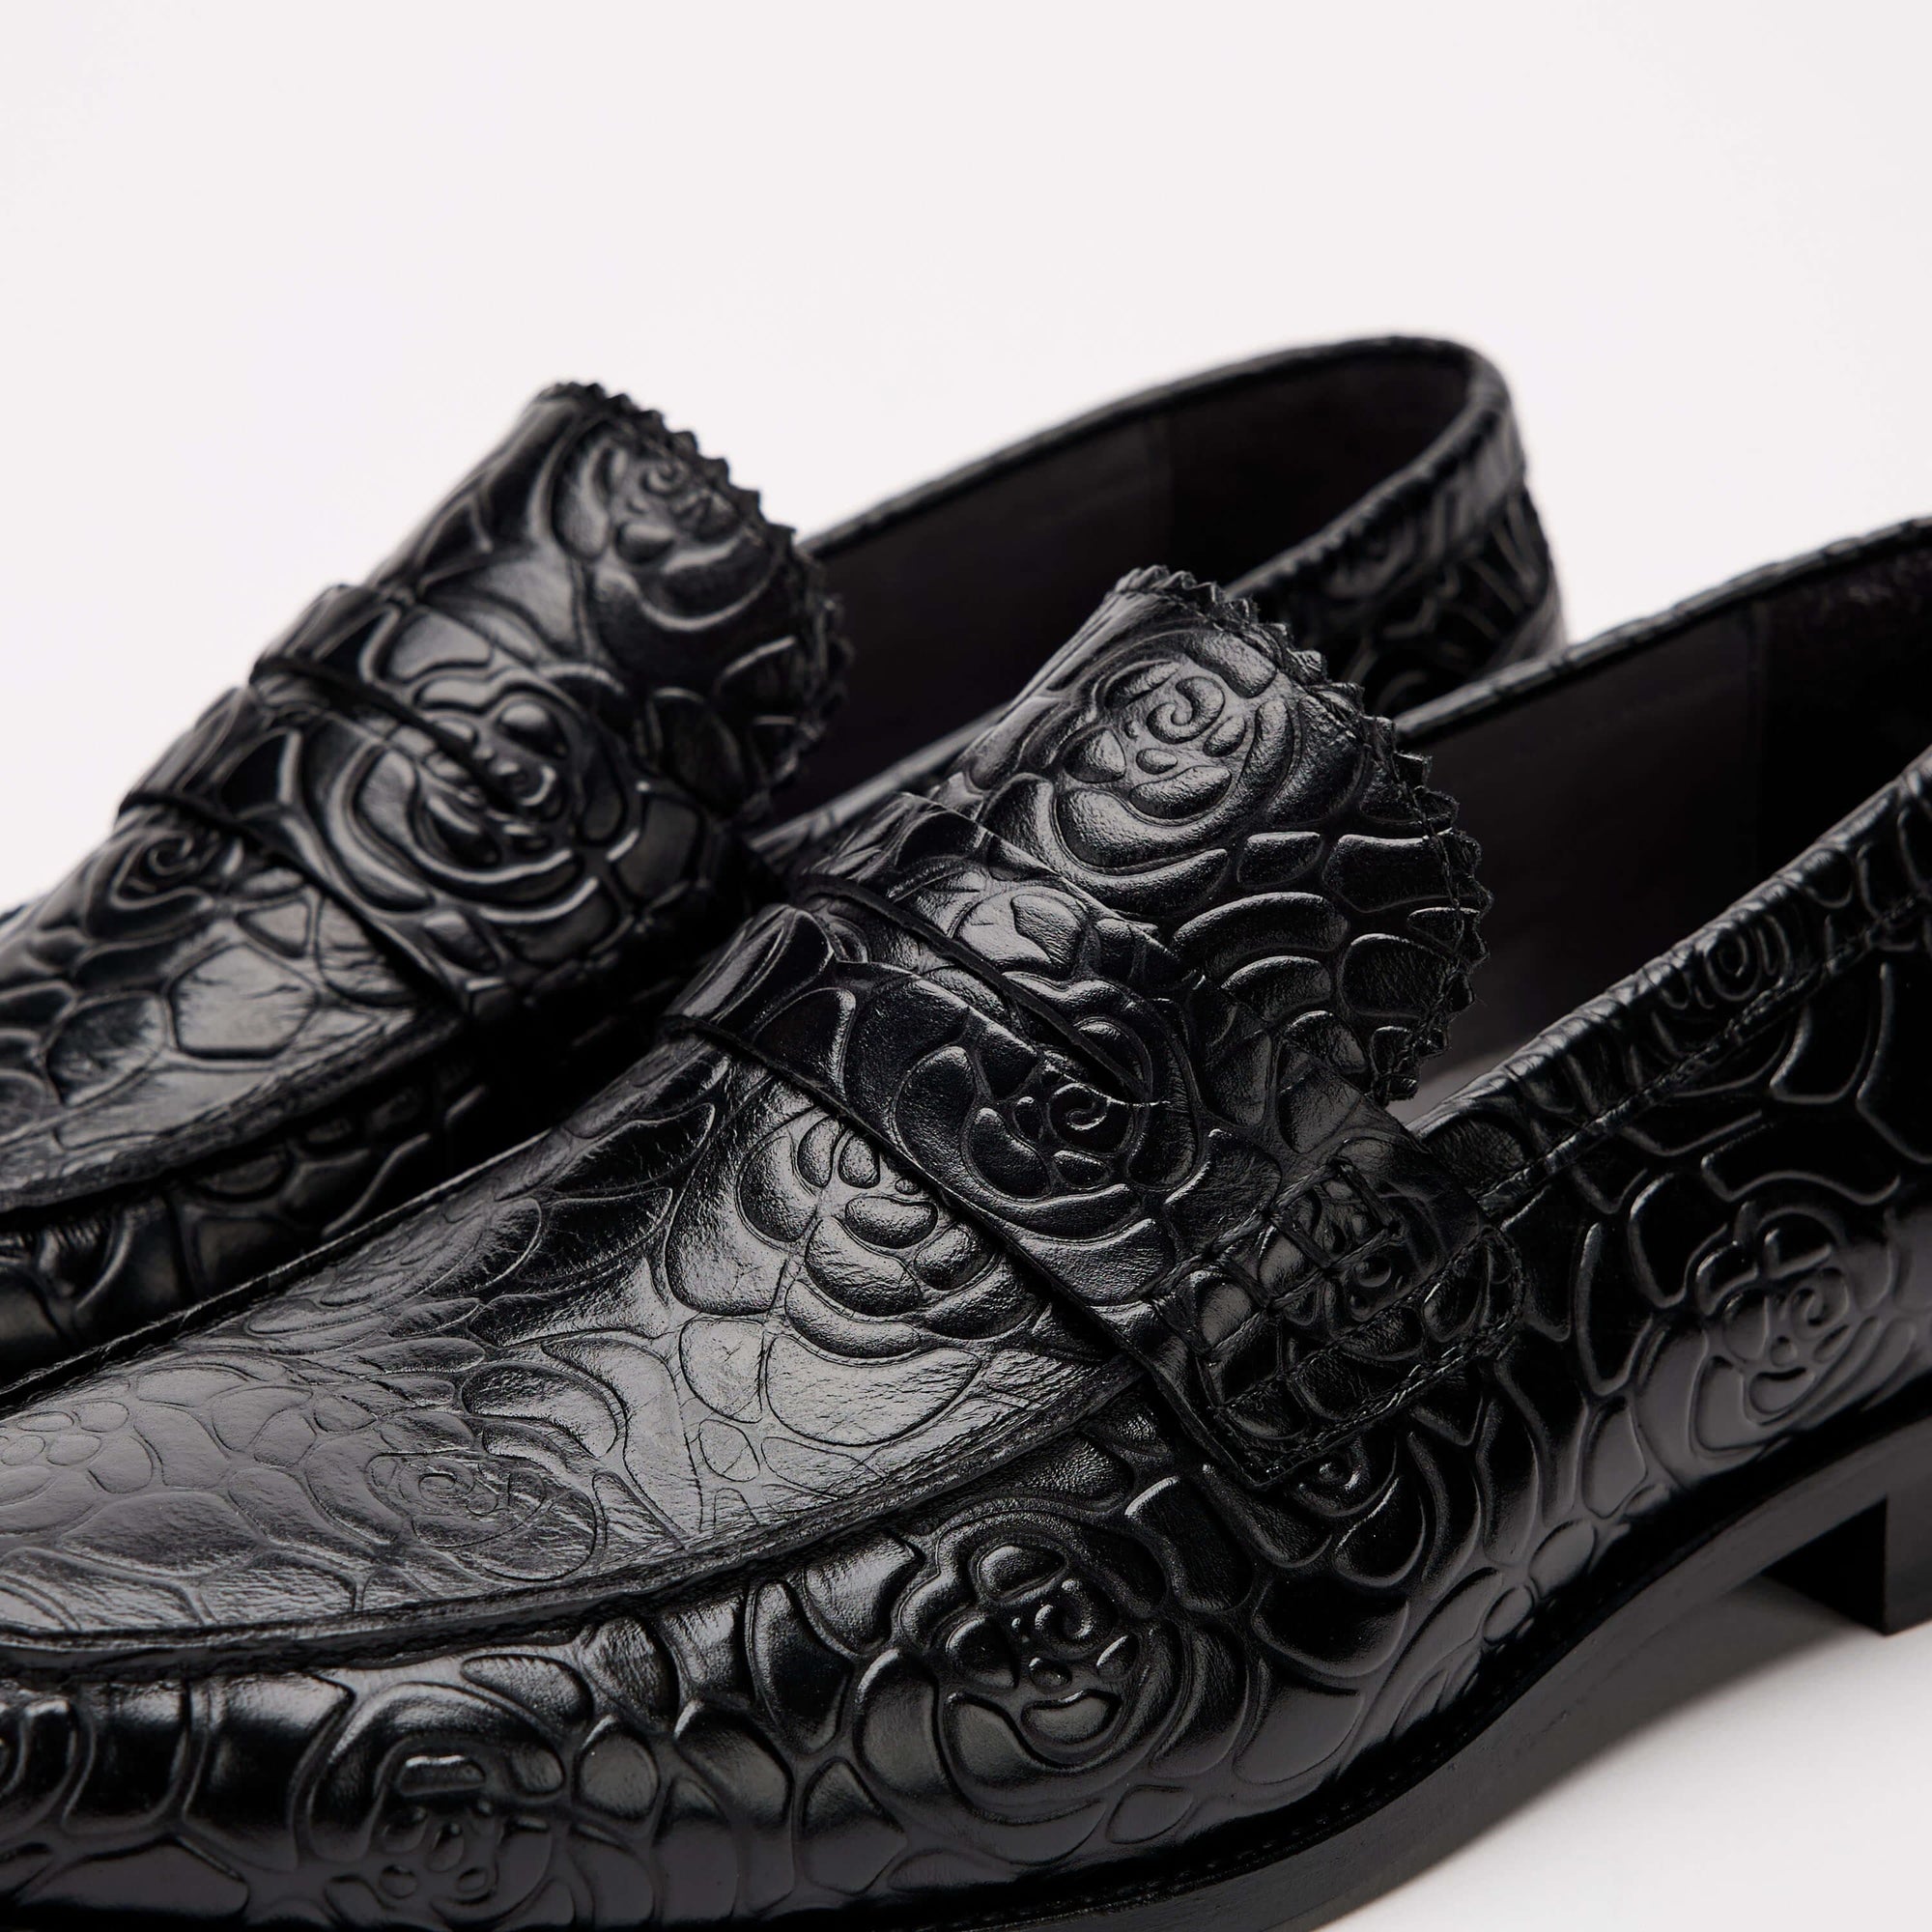 Abe Black Floral Penny Loafers